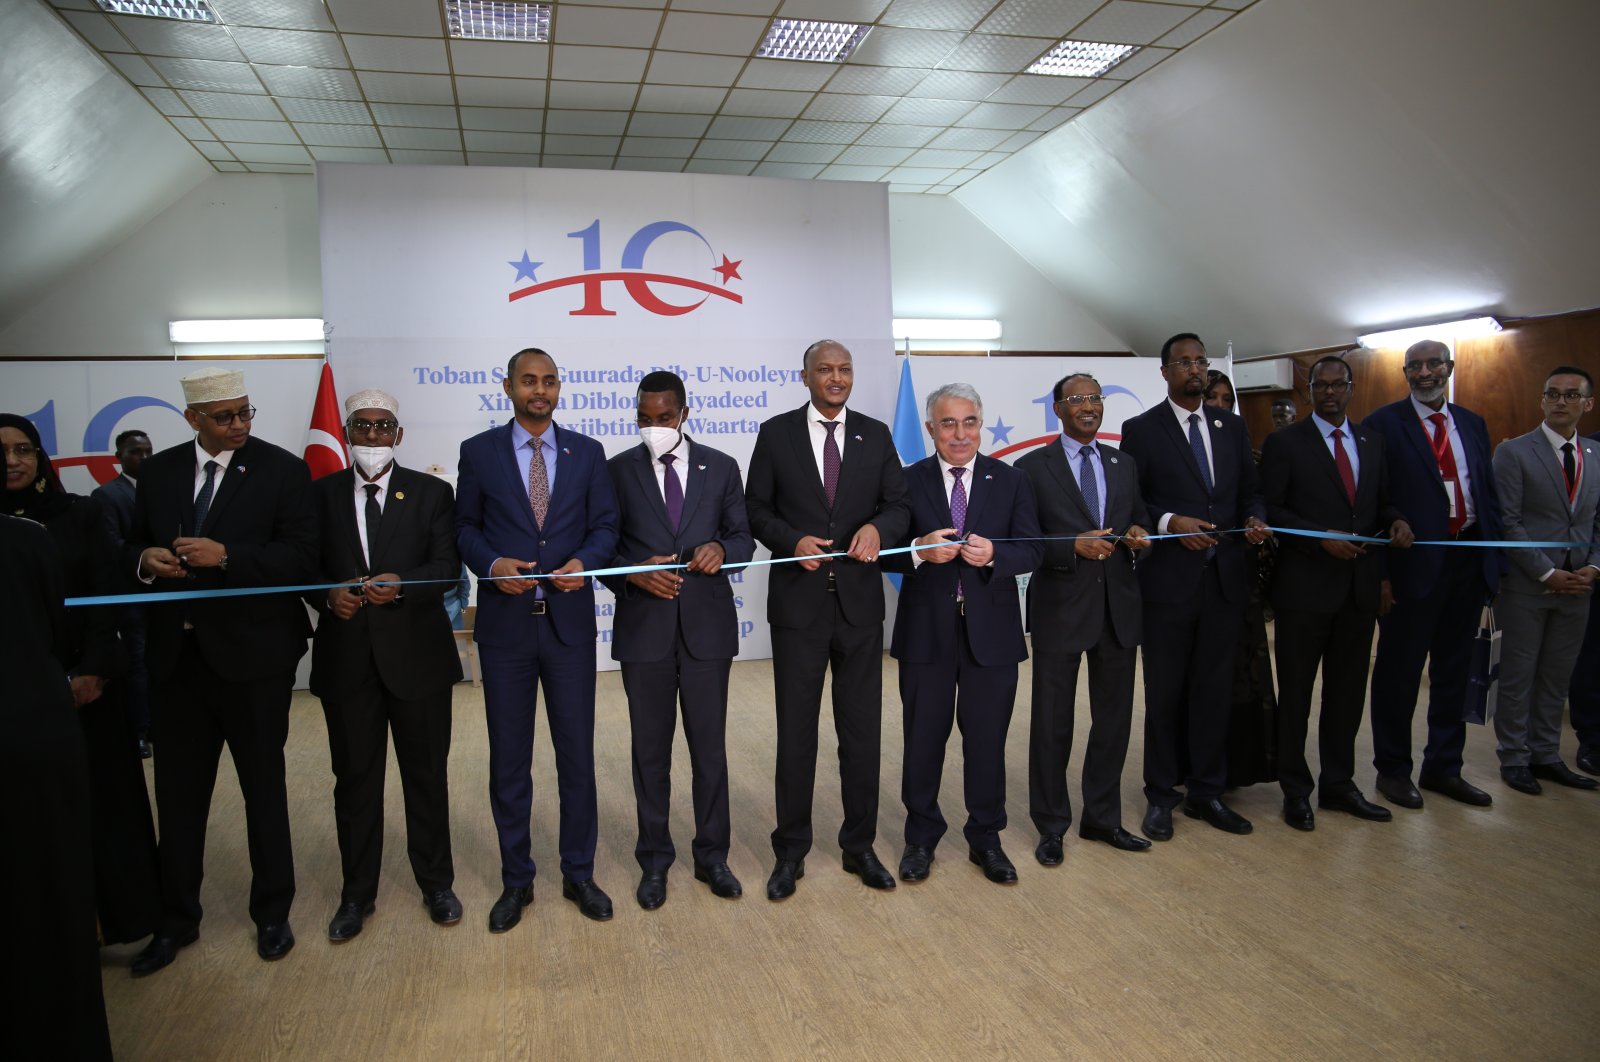 Officials cut a ribbon during a ceremony to mark 10 years of Turkish and Somali relations, in Mogadishu, Somalia, Aug. 19, 2021. (AA Photo)